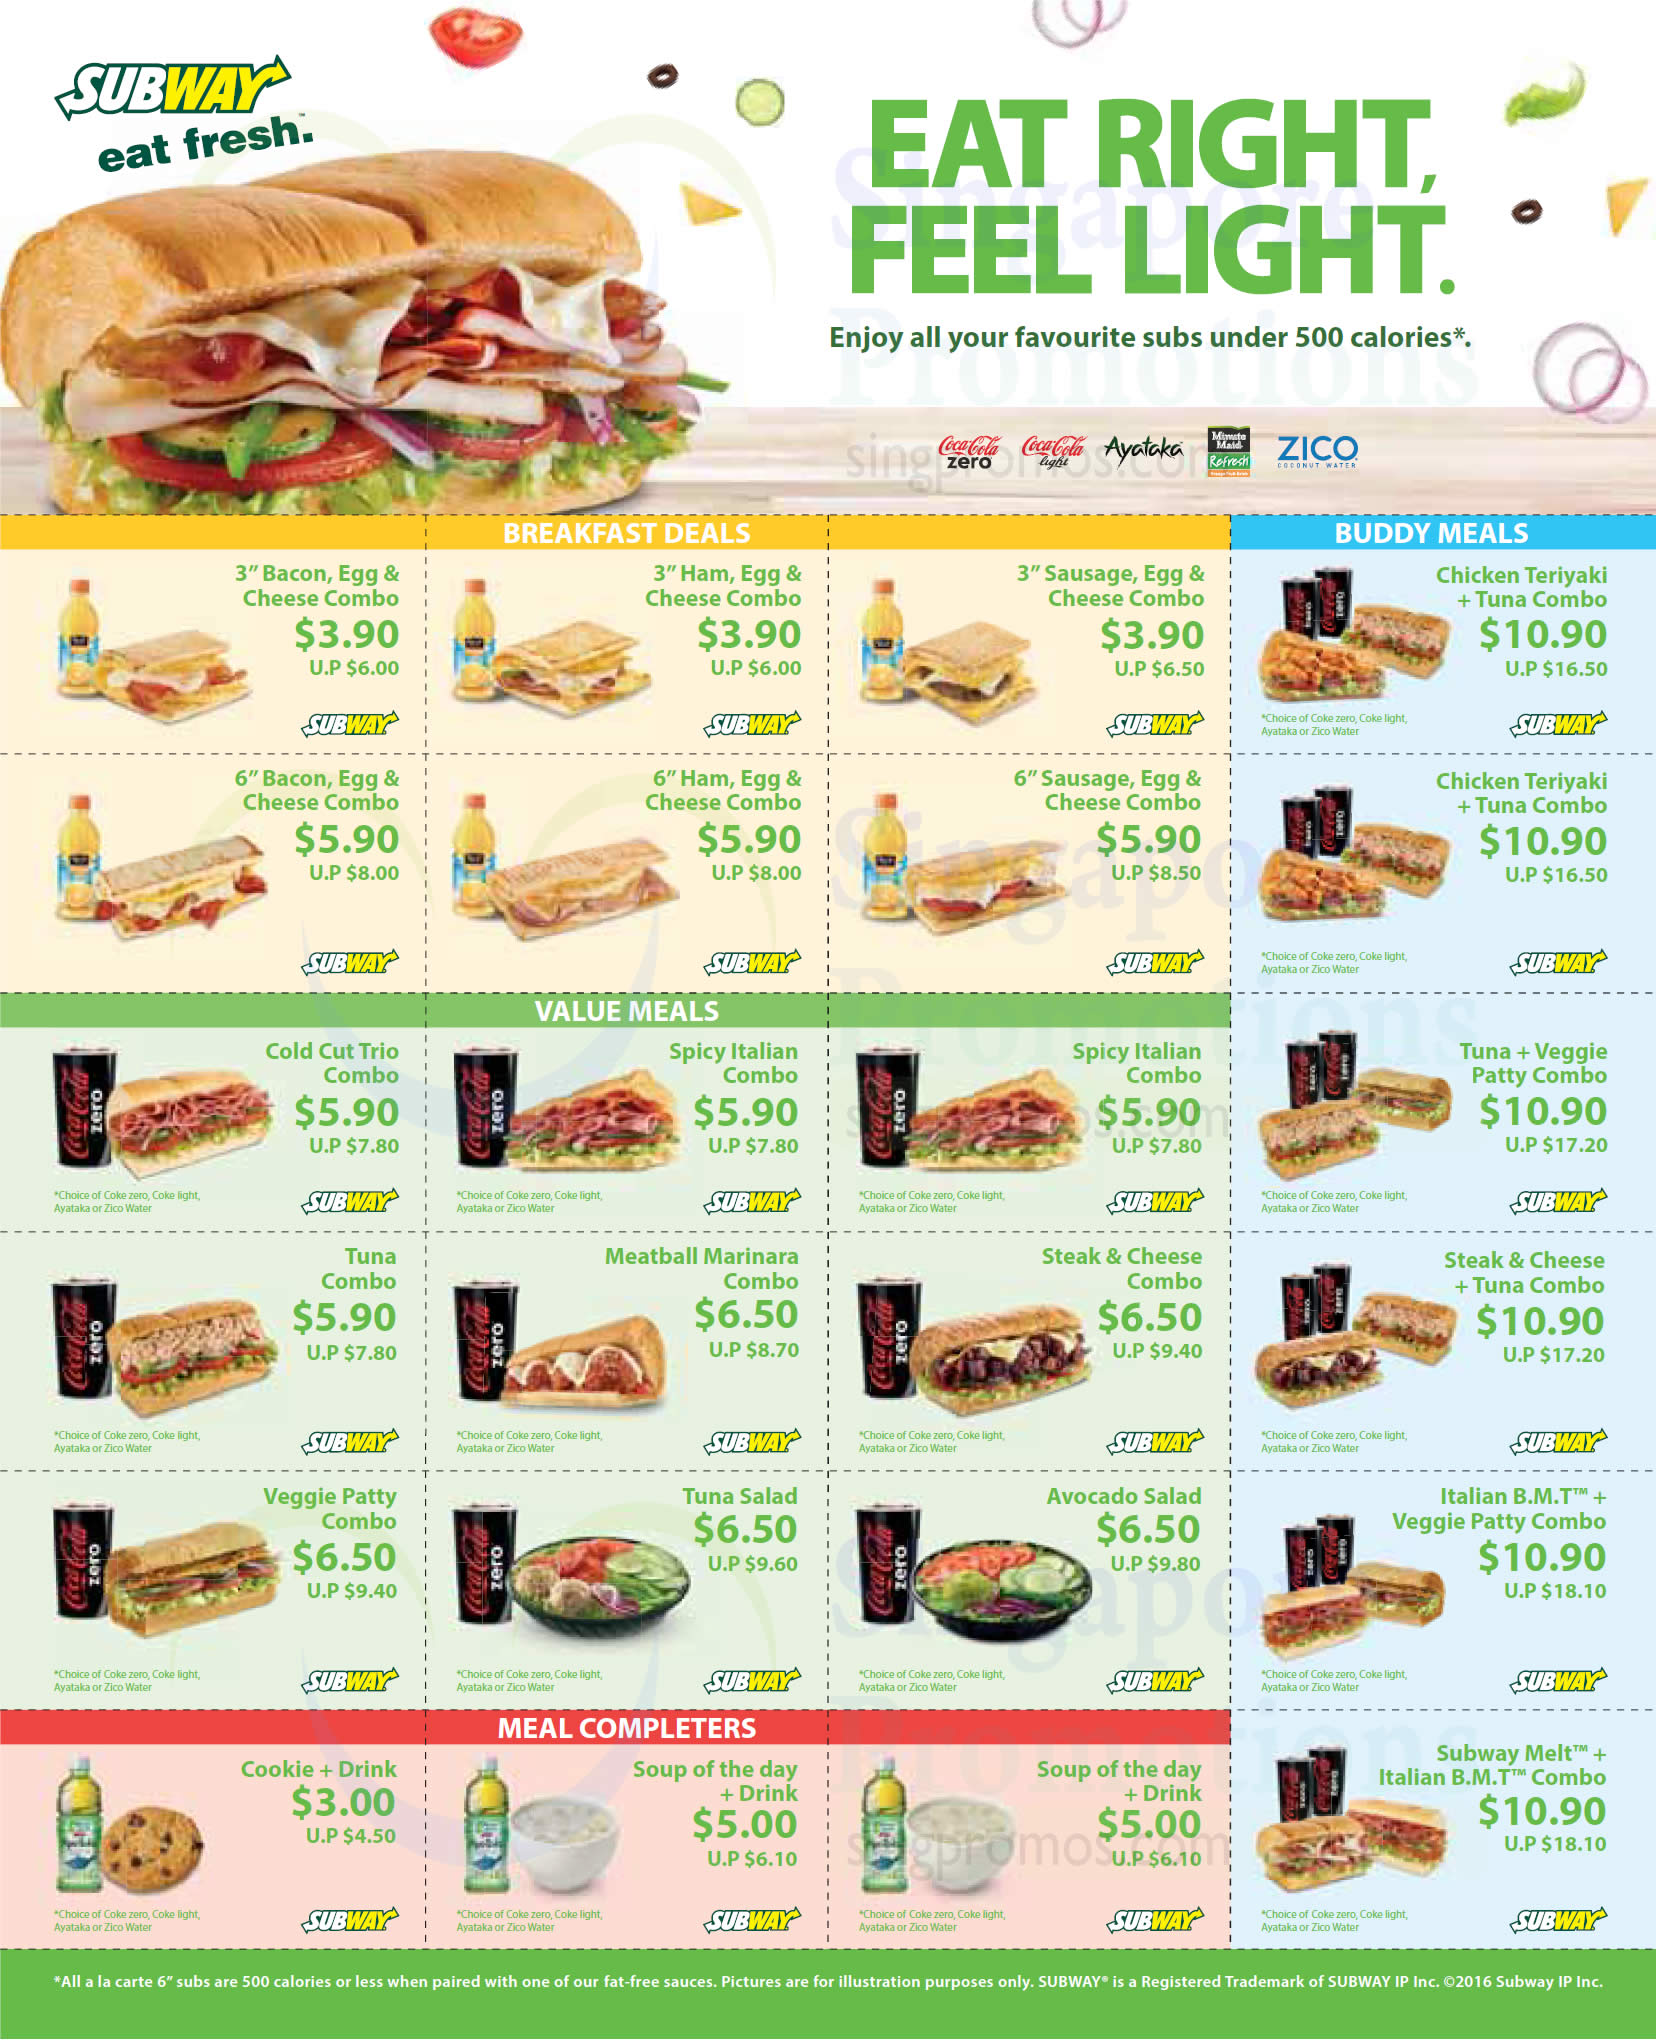 Subway's latest coupon deals let you save up to $7.20 from 4 Nov - 7 D...